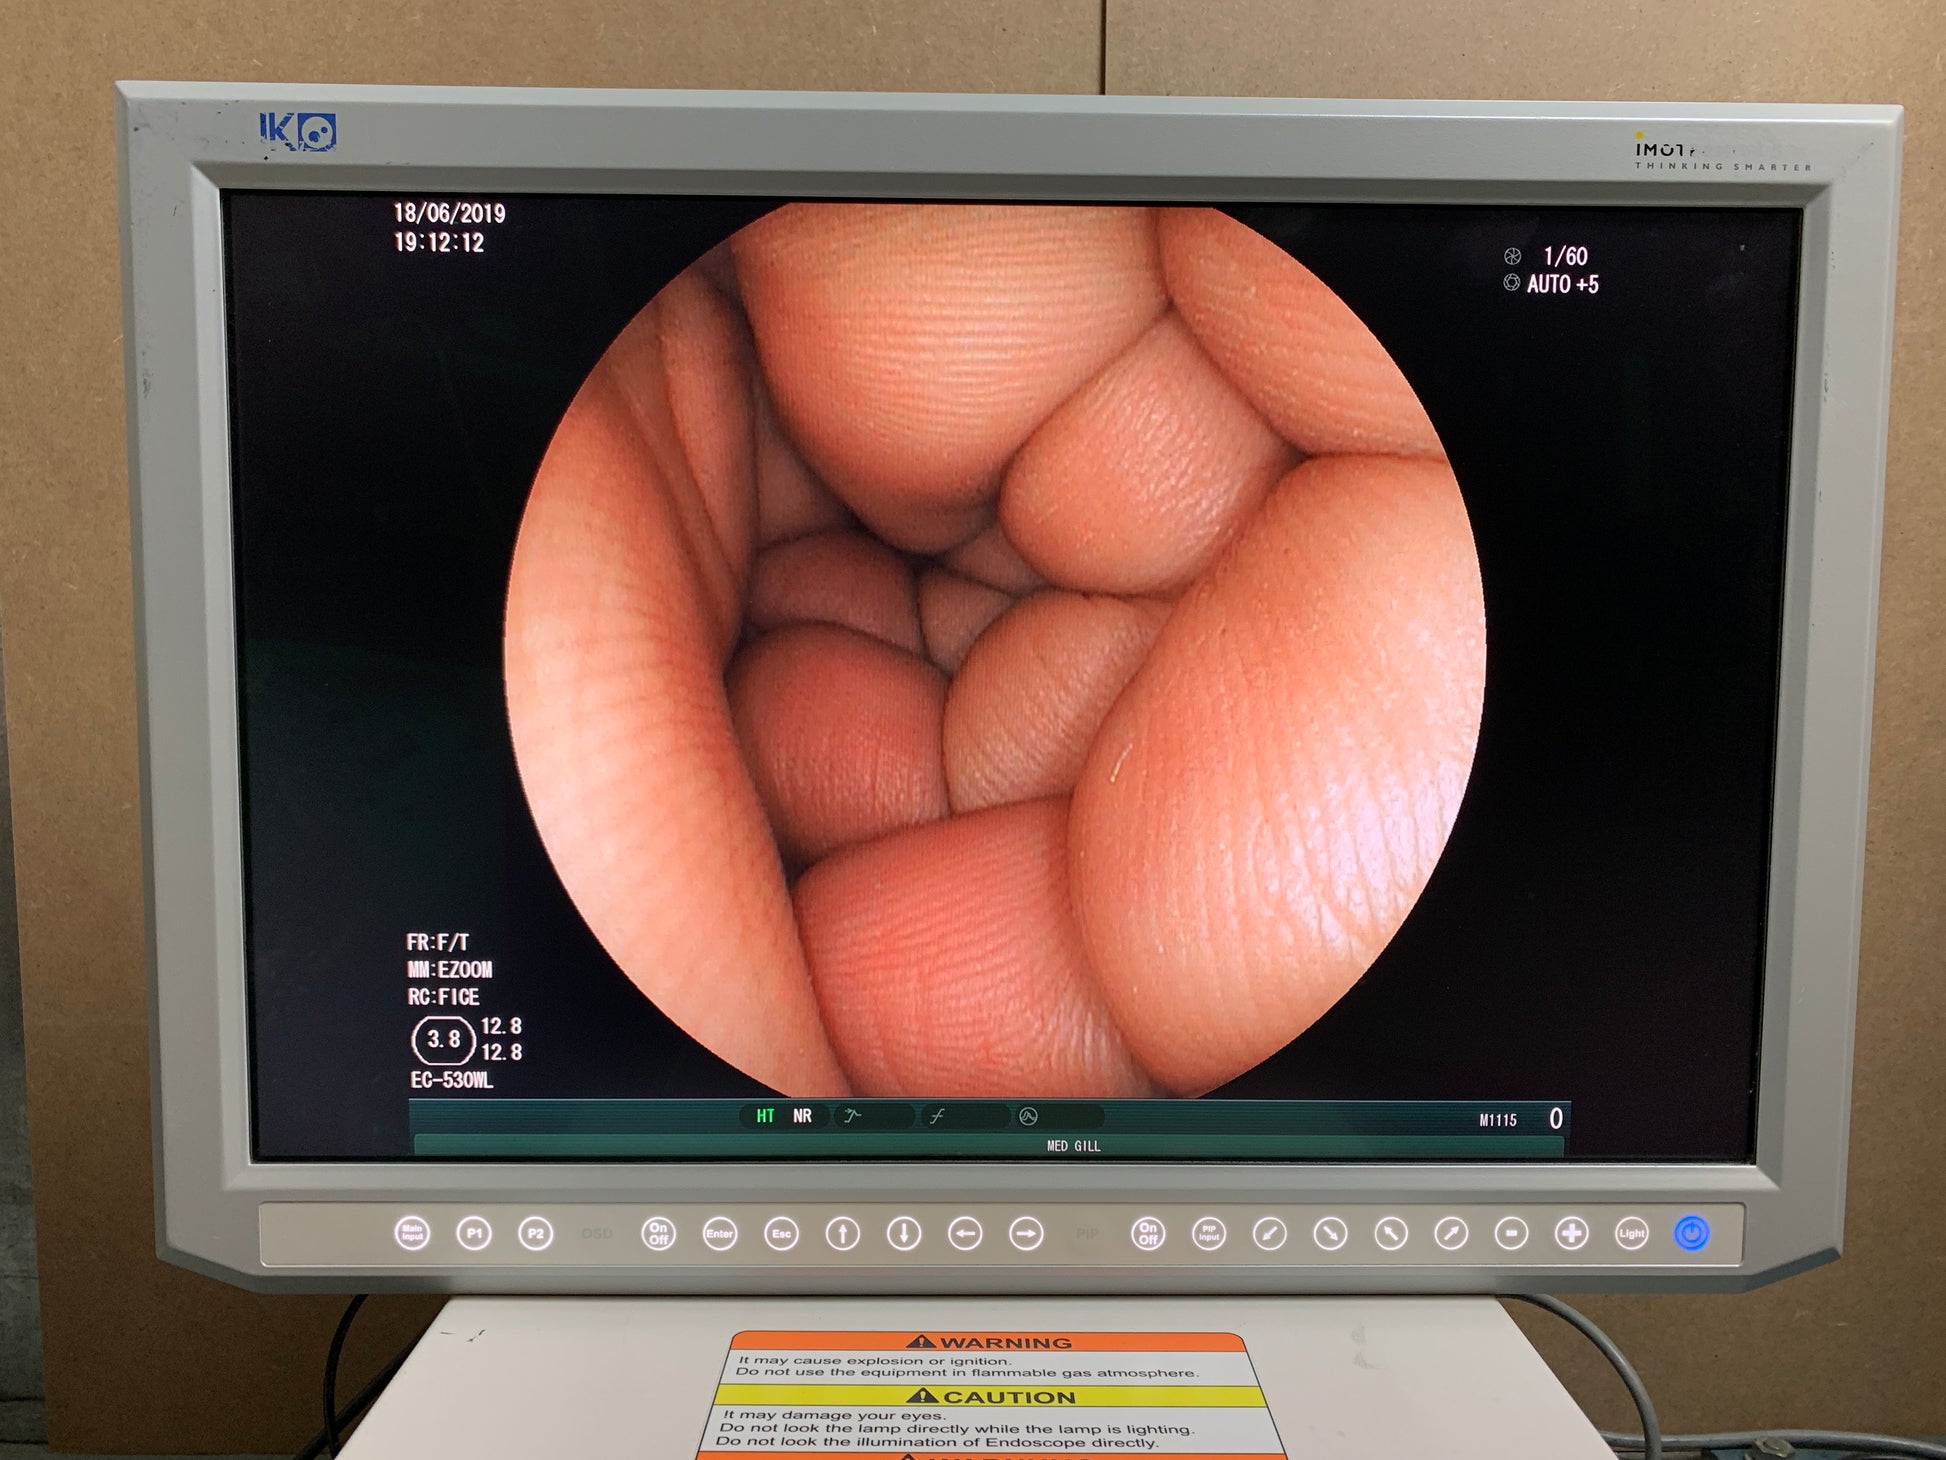 Monitor Widest field of view available in a colonoscope, 170 degrees Full screen display size give superior image quality